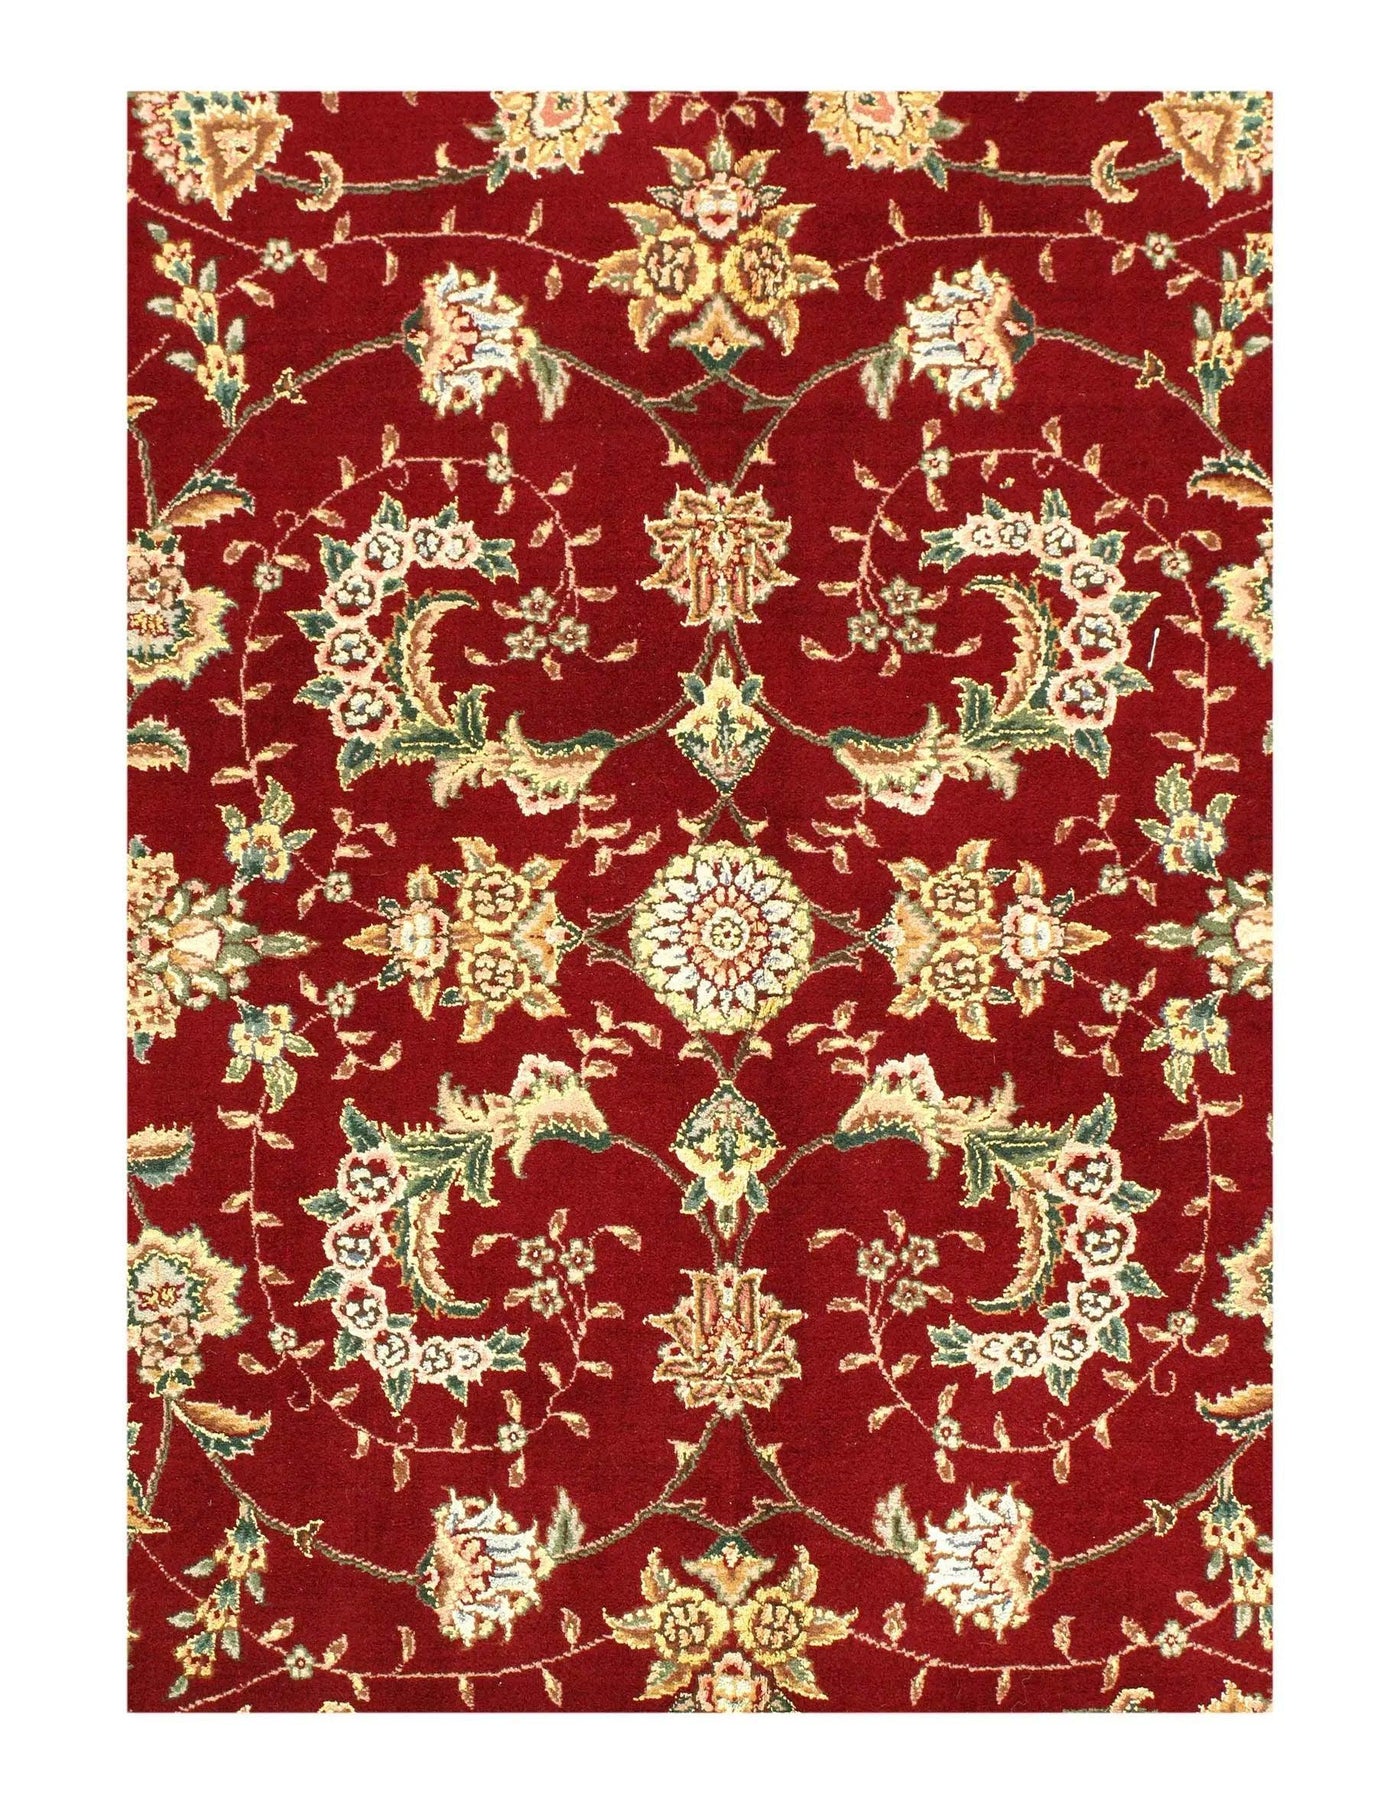 Canvello Sino Tabriz Hand-Knotted Rug - 8'1" x 10'2"